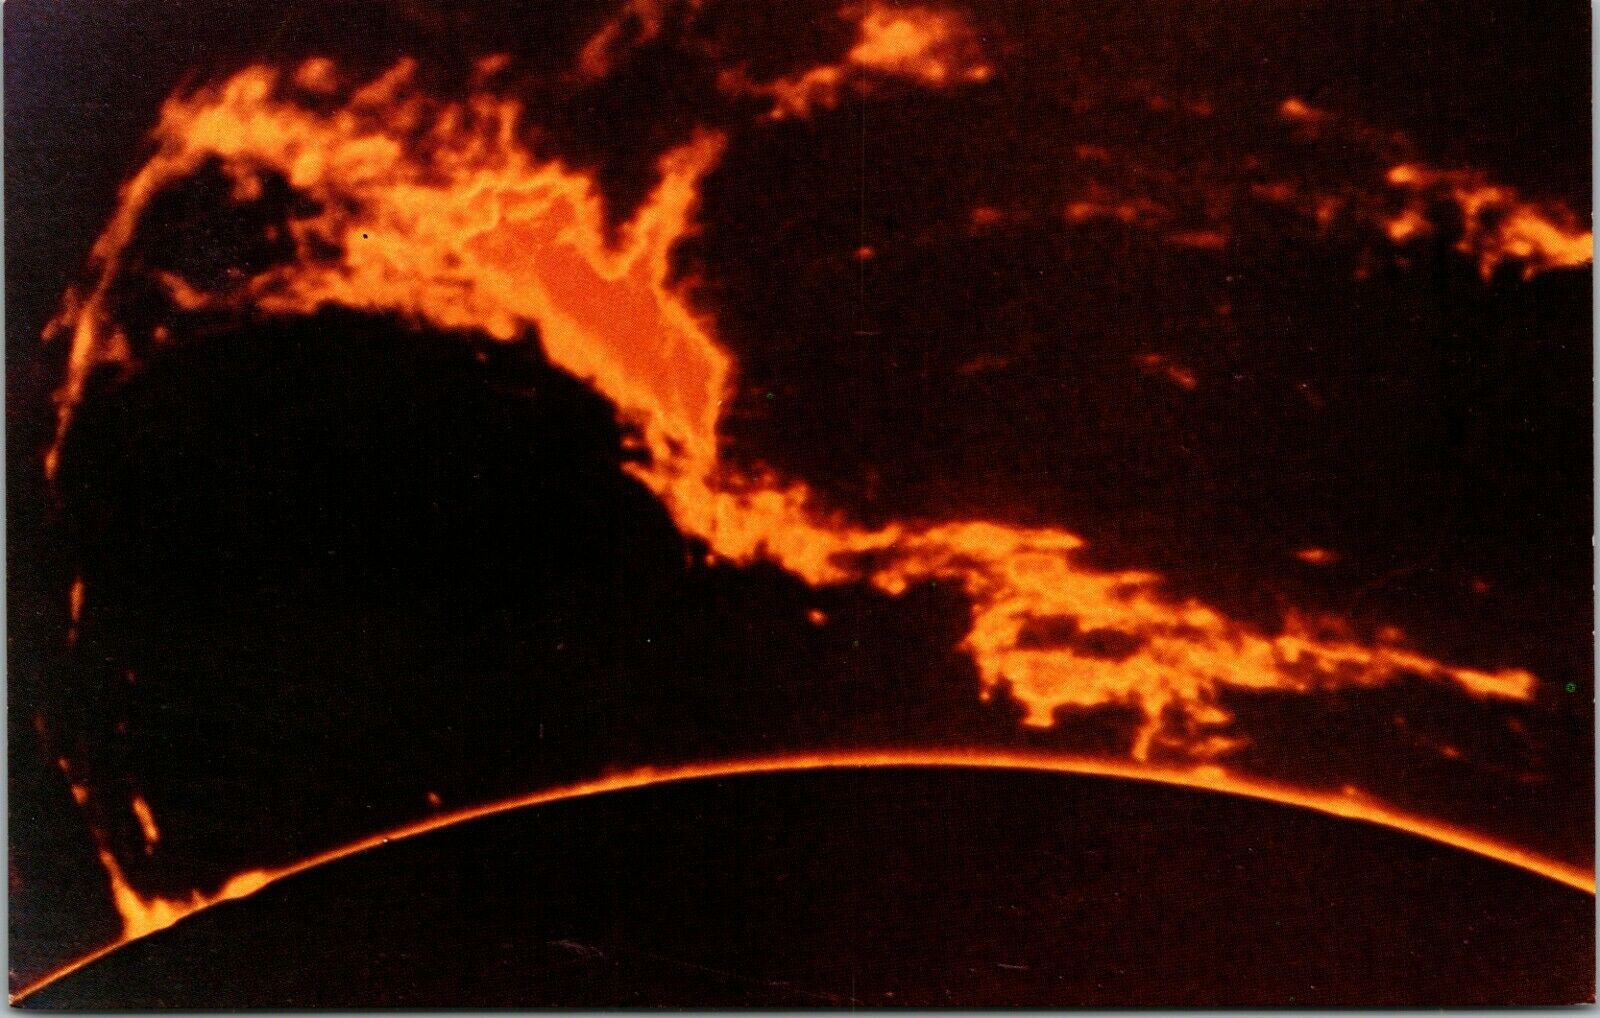 Solar Eruption Suns Heat Flares Particles Emissions Varying Intensity Postcard